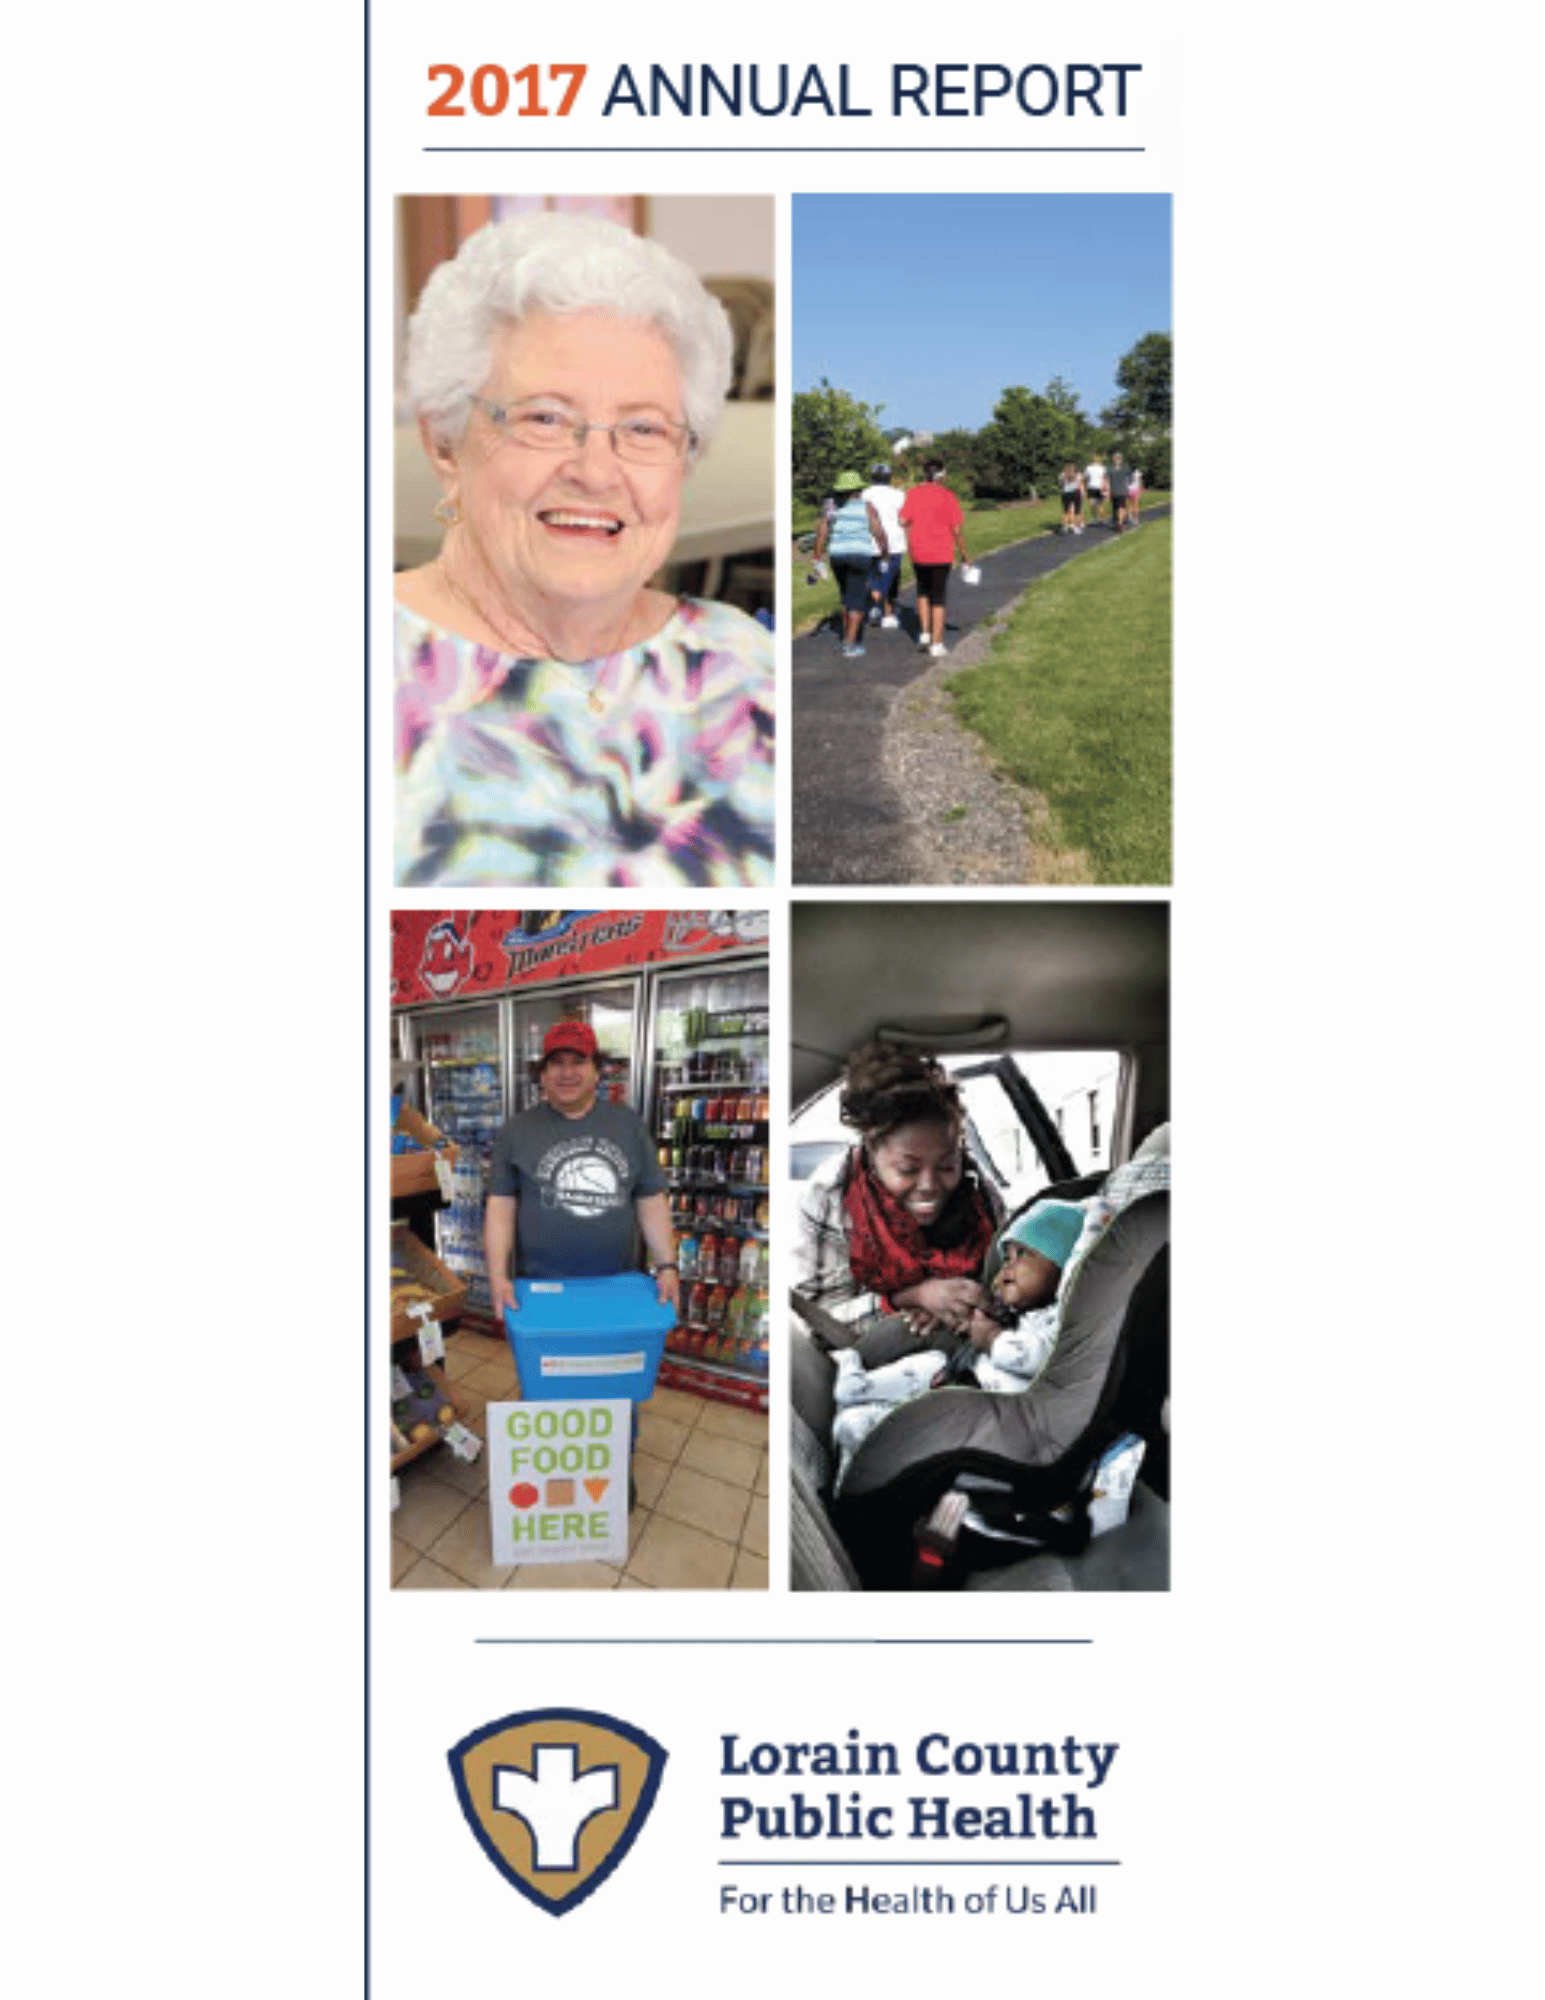 Title: 2017 Annual Report Lorain County Public Health. A photo of an older woman, people walking on a trail, a man standing in front of a produce display, and a woman smiling at her baby in a car seat